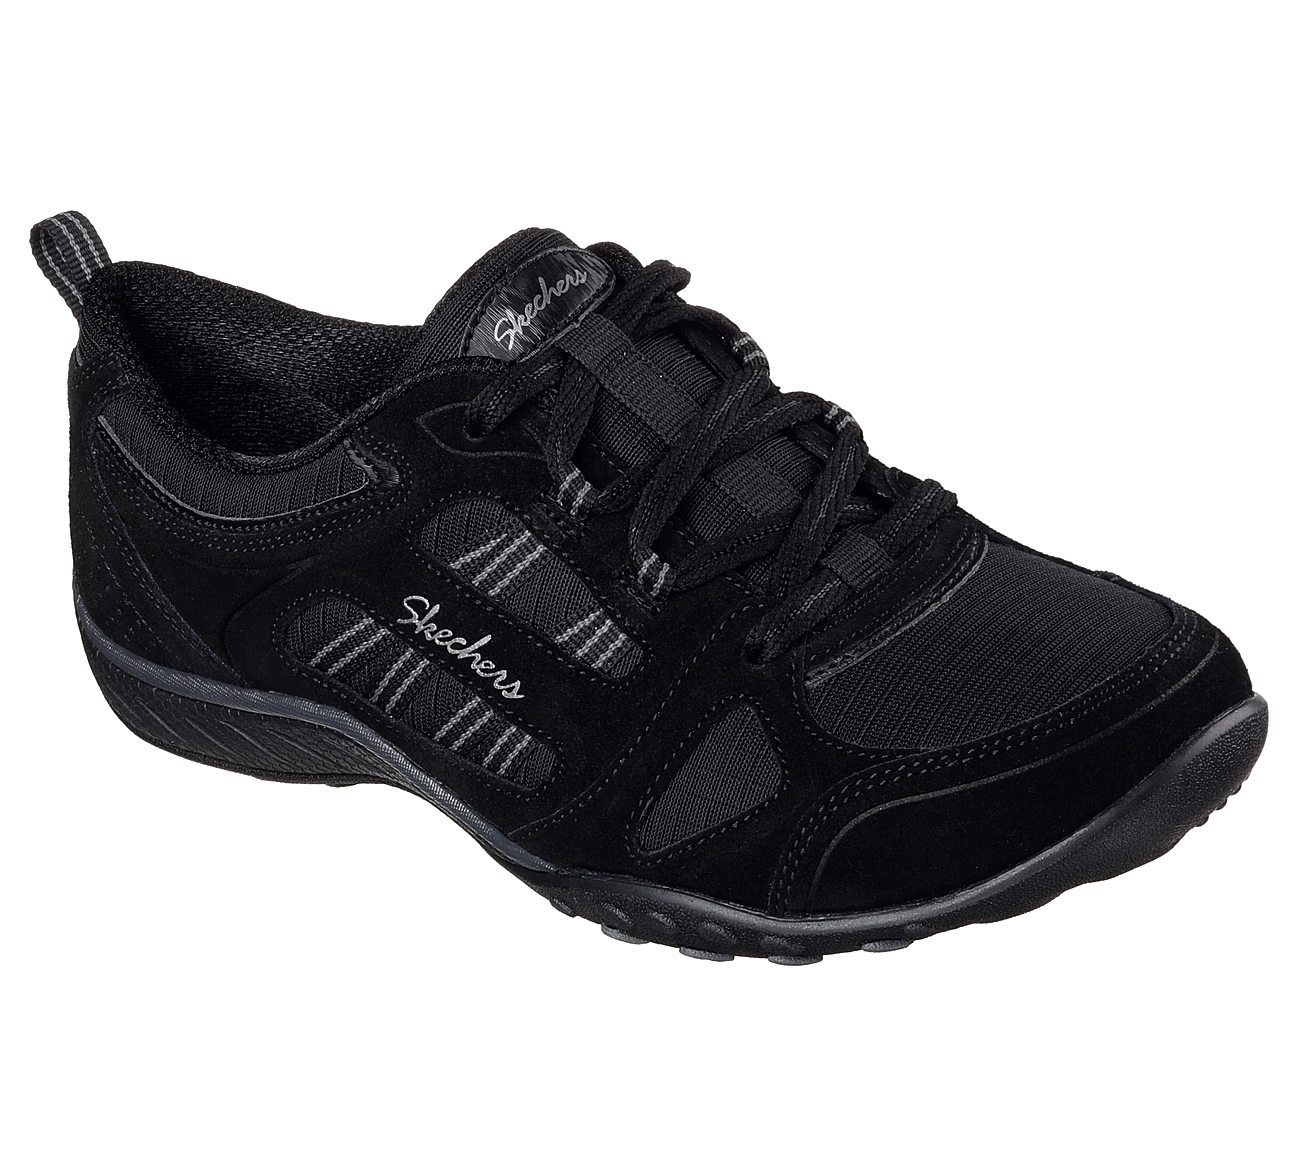 Buy SKECHERS Relaxed Fit: Breathe Easy - Good Luck Active Shoes